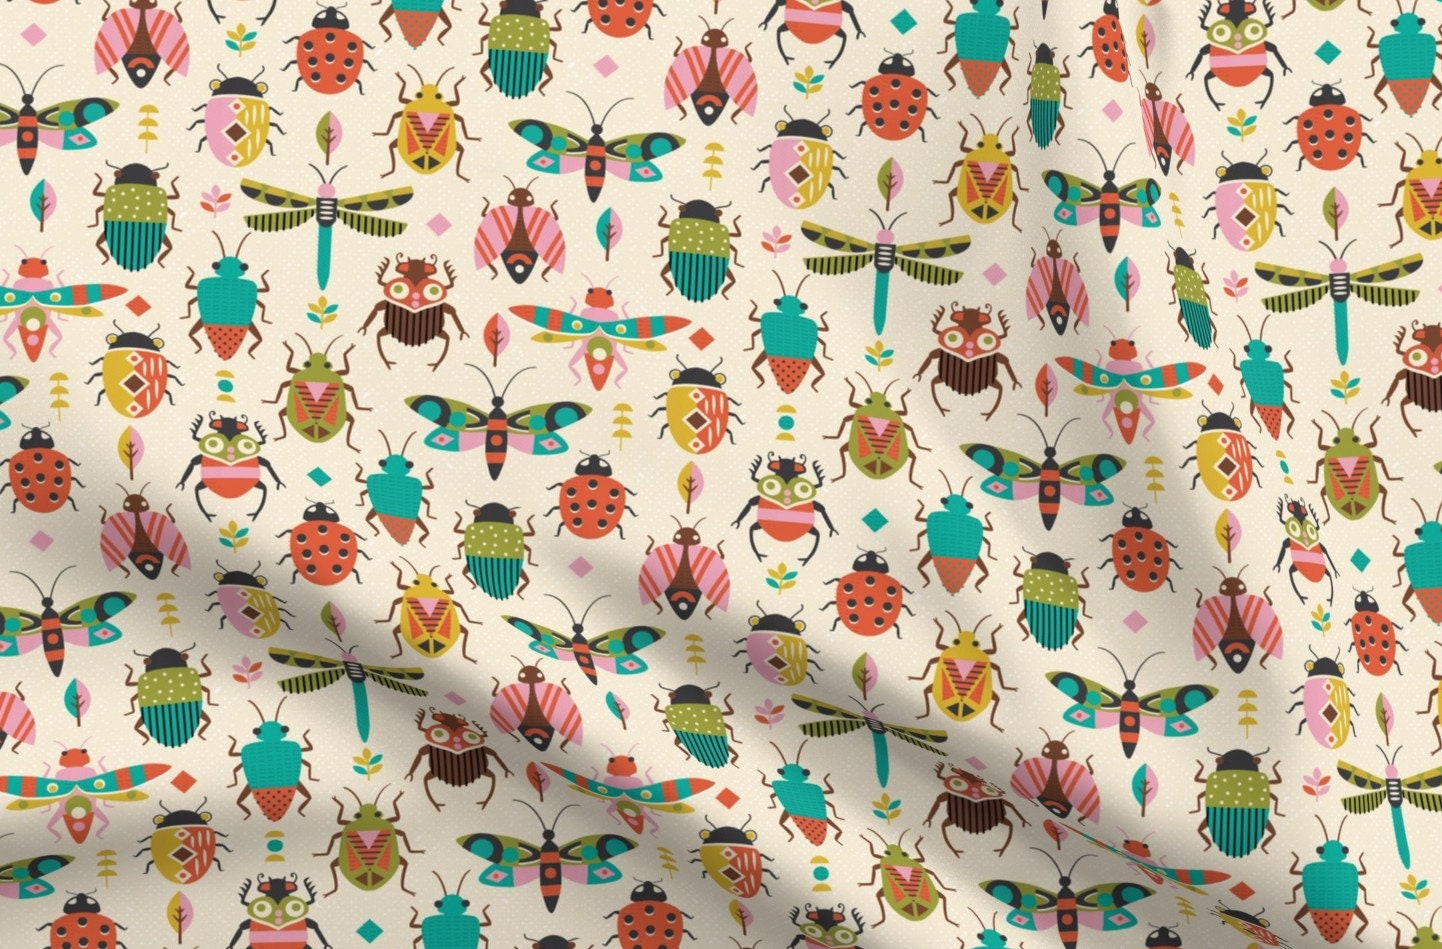 Colorful Bugs Sheets Mid Century Bugs by Sally_mountain Beetles Moths  Dragonflies Insects Cotton Sateen Sheet Set Bedding by Spoonflower - Etsy